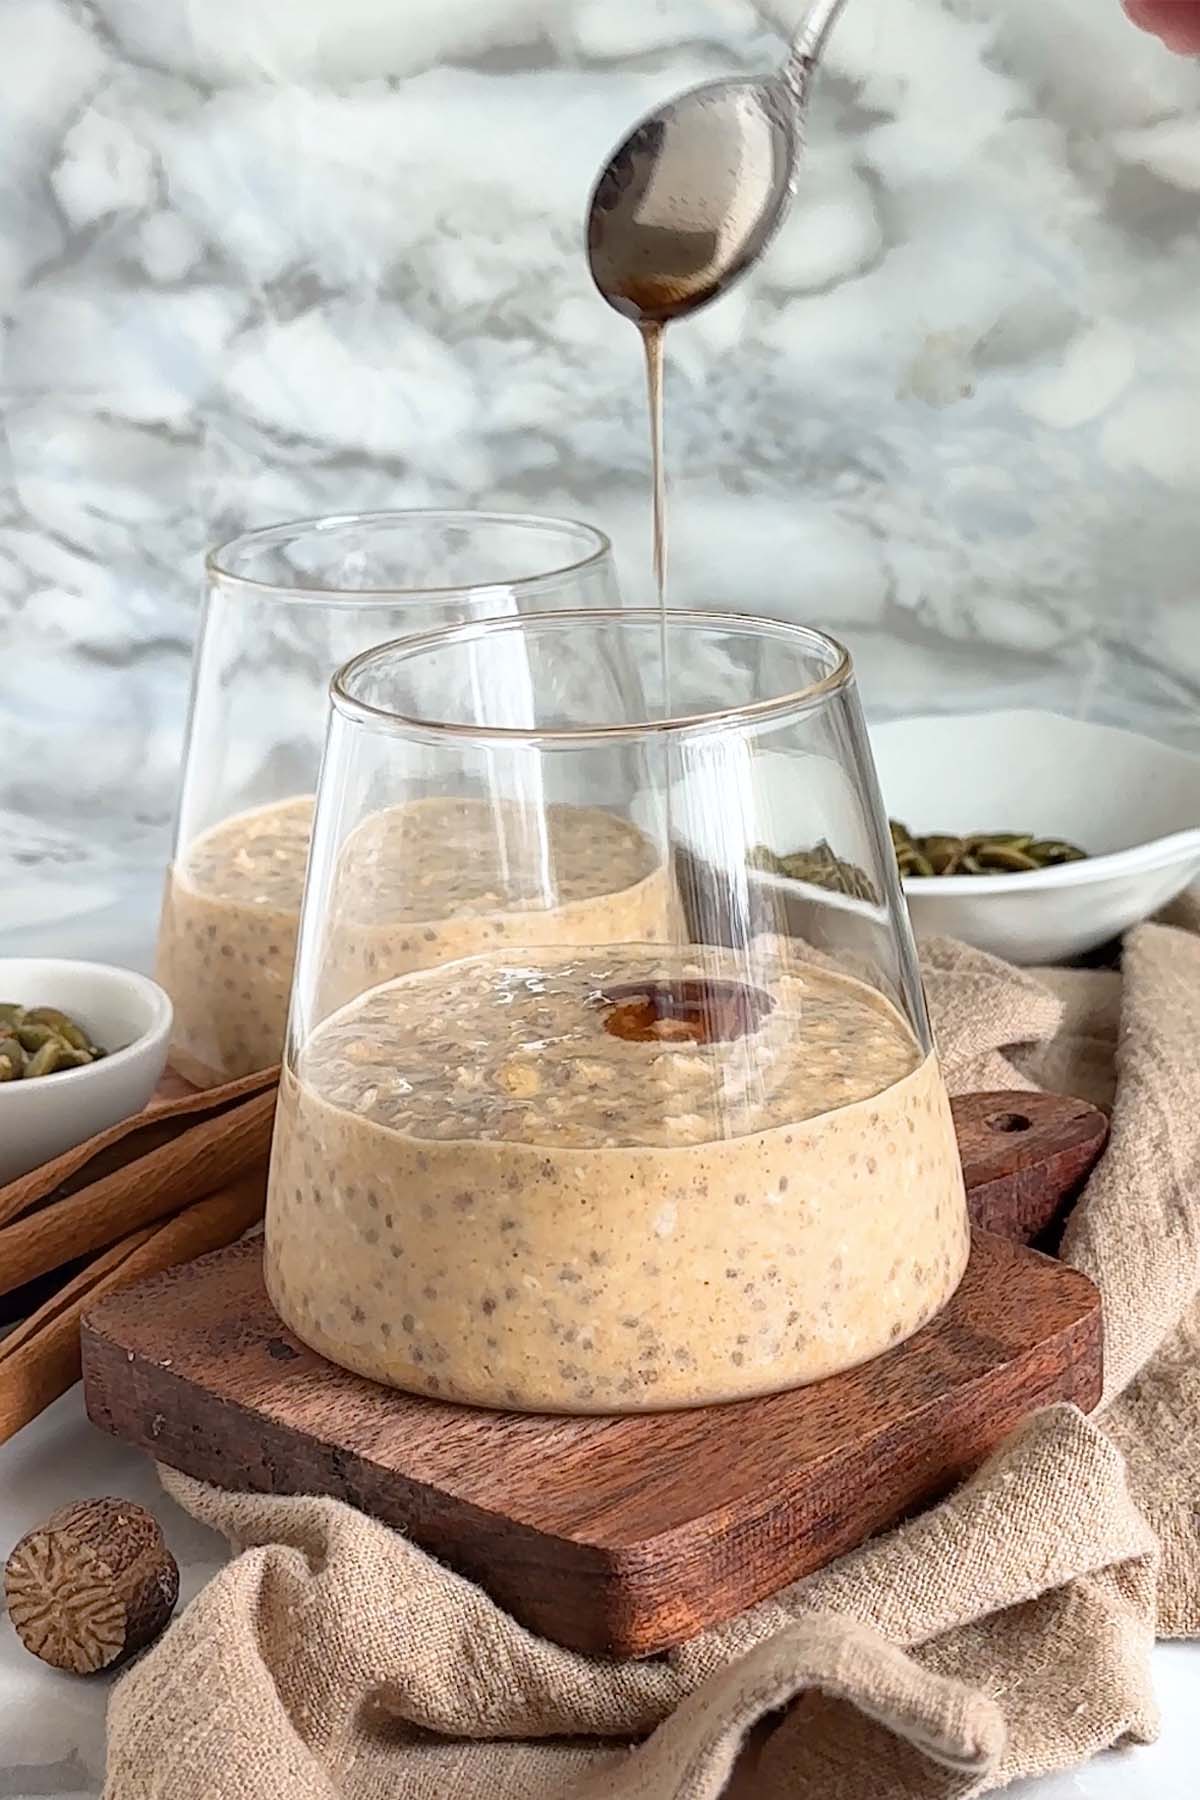 Syrup is added to oats in a glass cup.